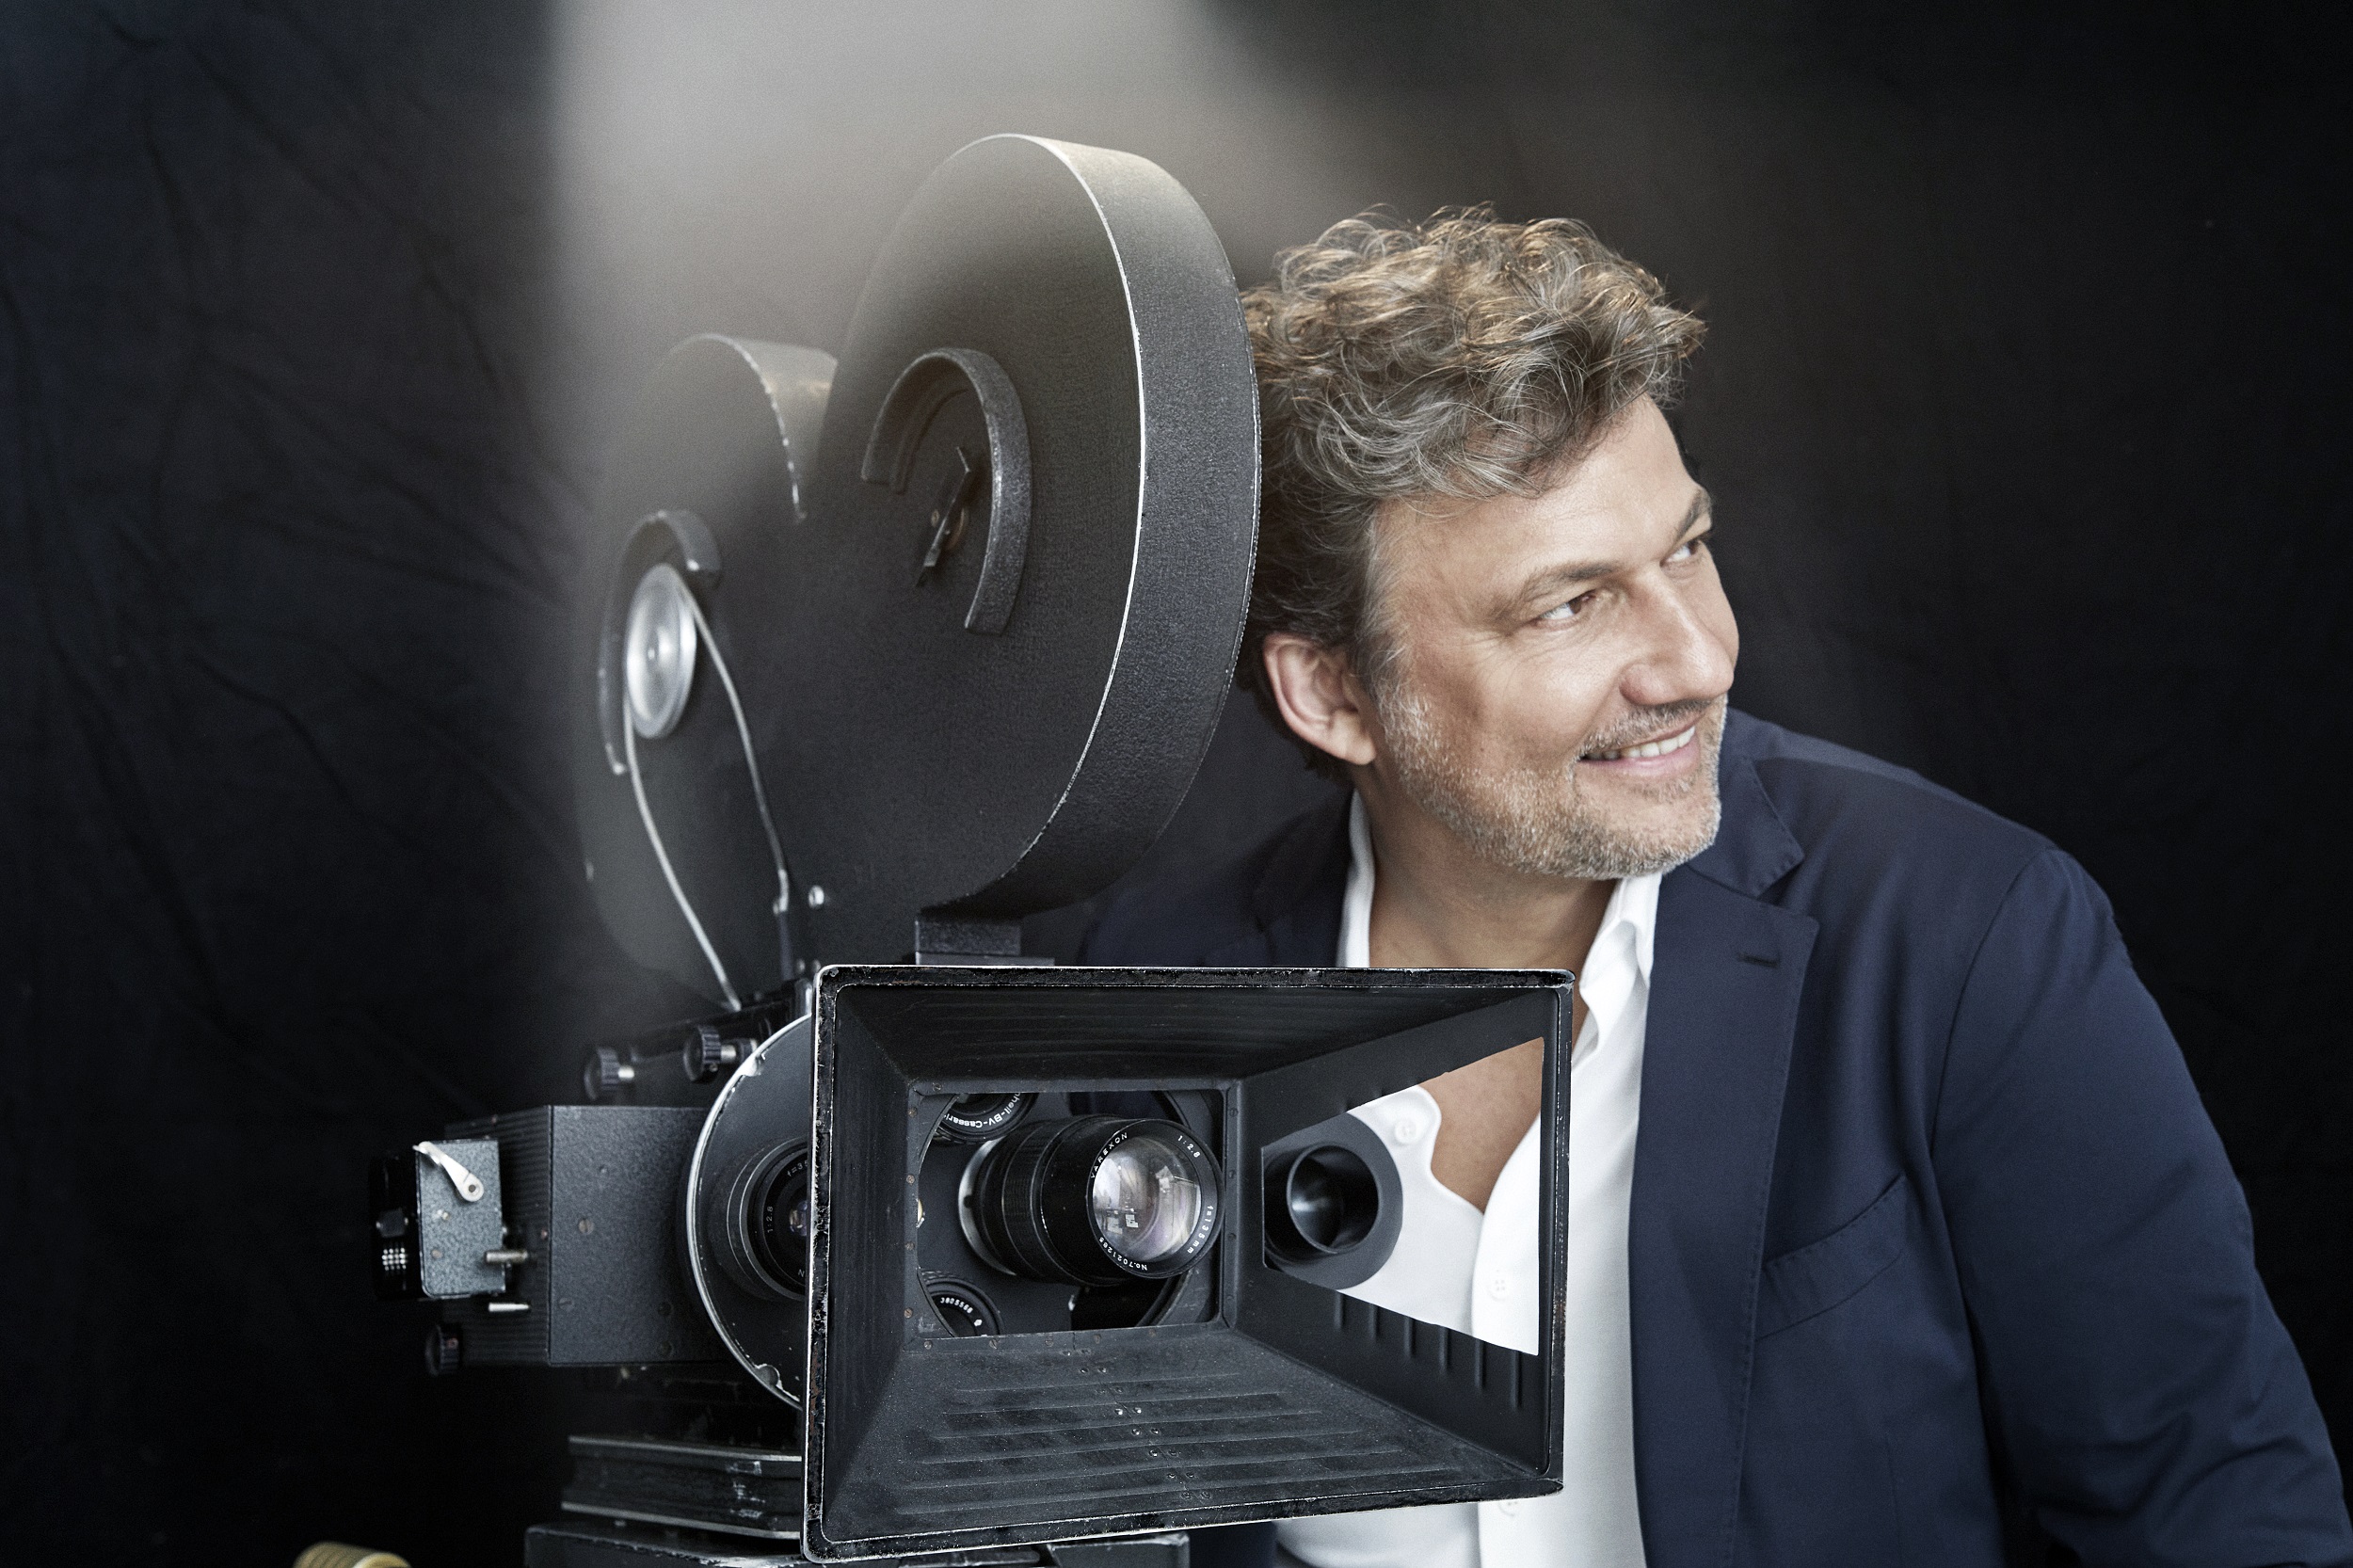 Jonas Kaufmann is pictured next to an old film projector. He is seen in side profile, smiling and wearing a white shirt and a dark blue jacket.